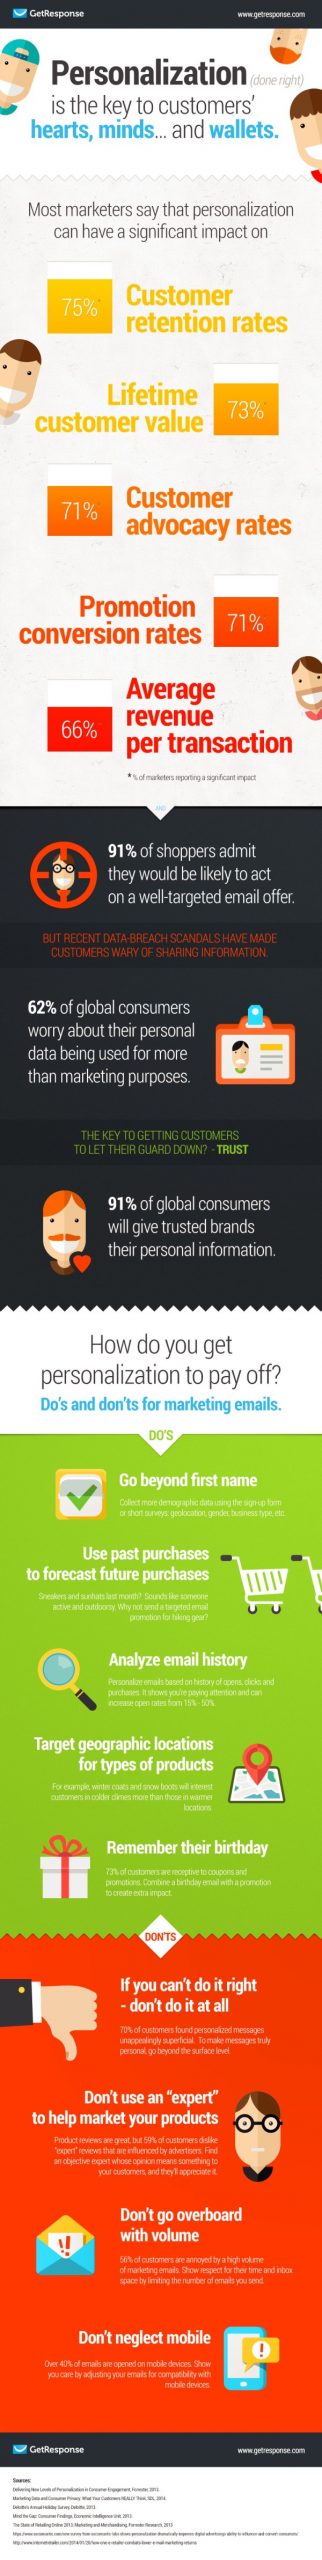 Infographic - Personalization The Key To Customers Hearts Minds And Wallets